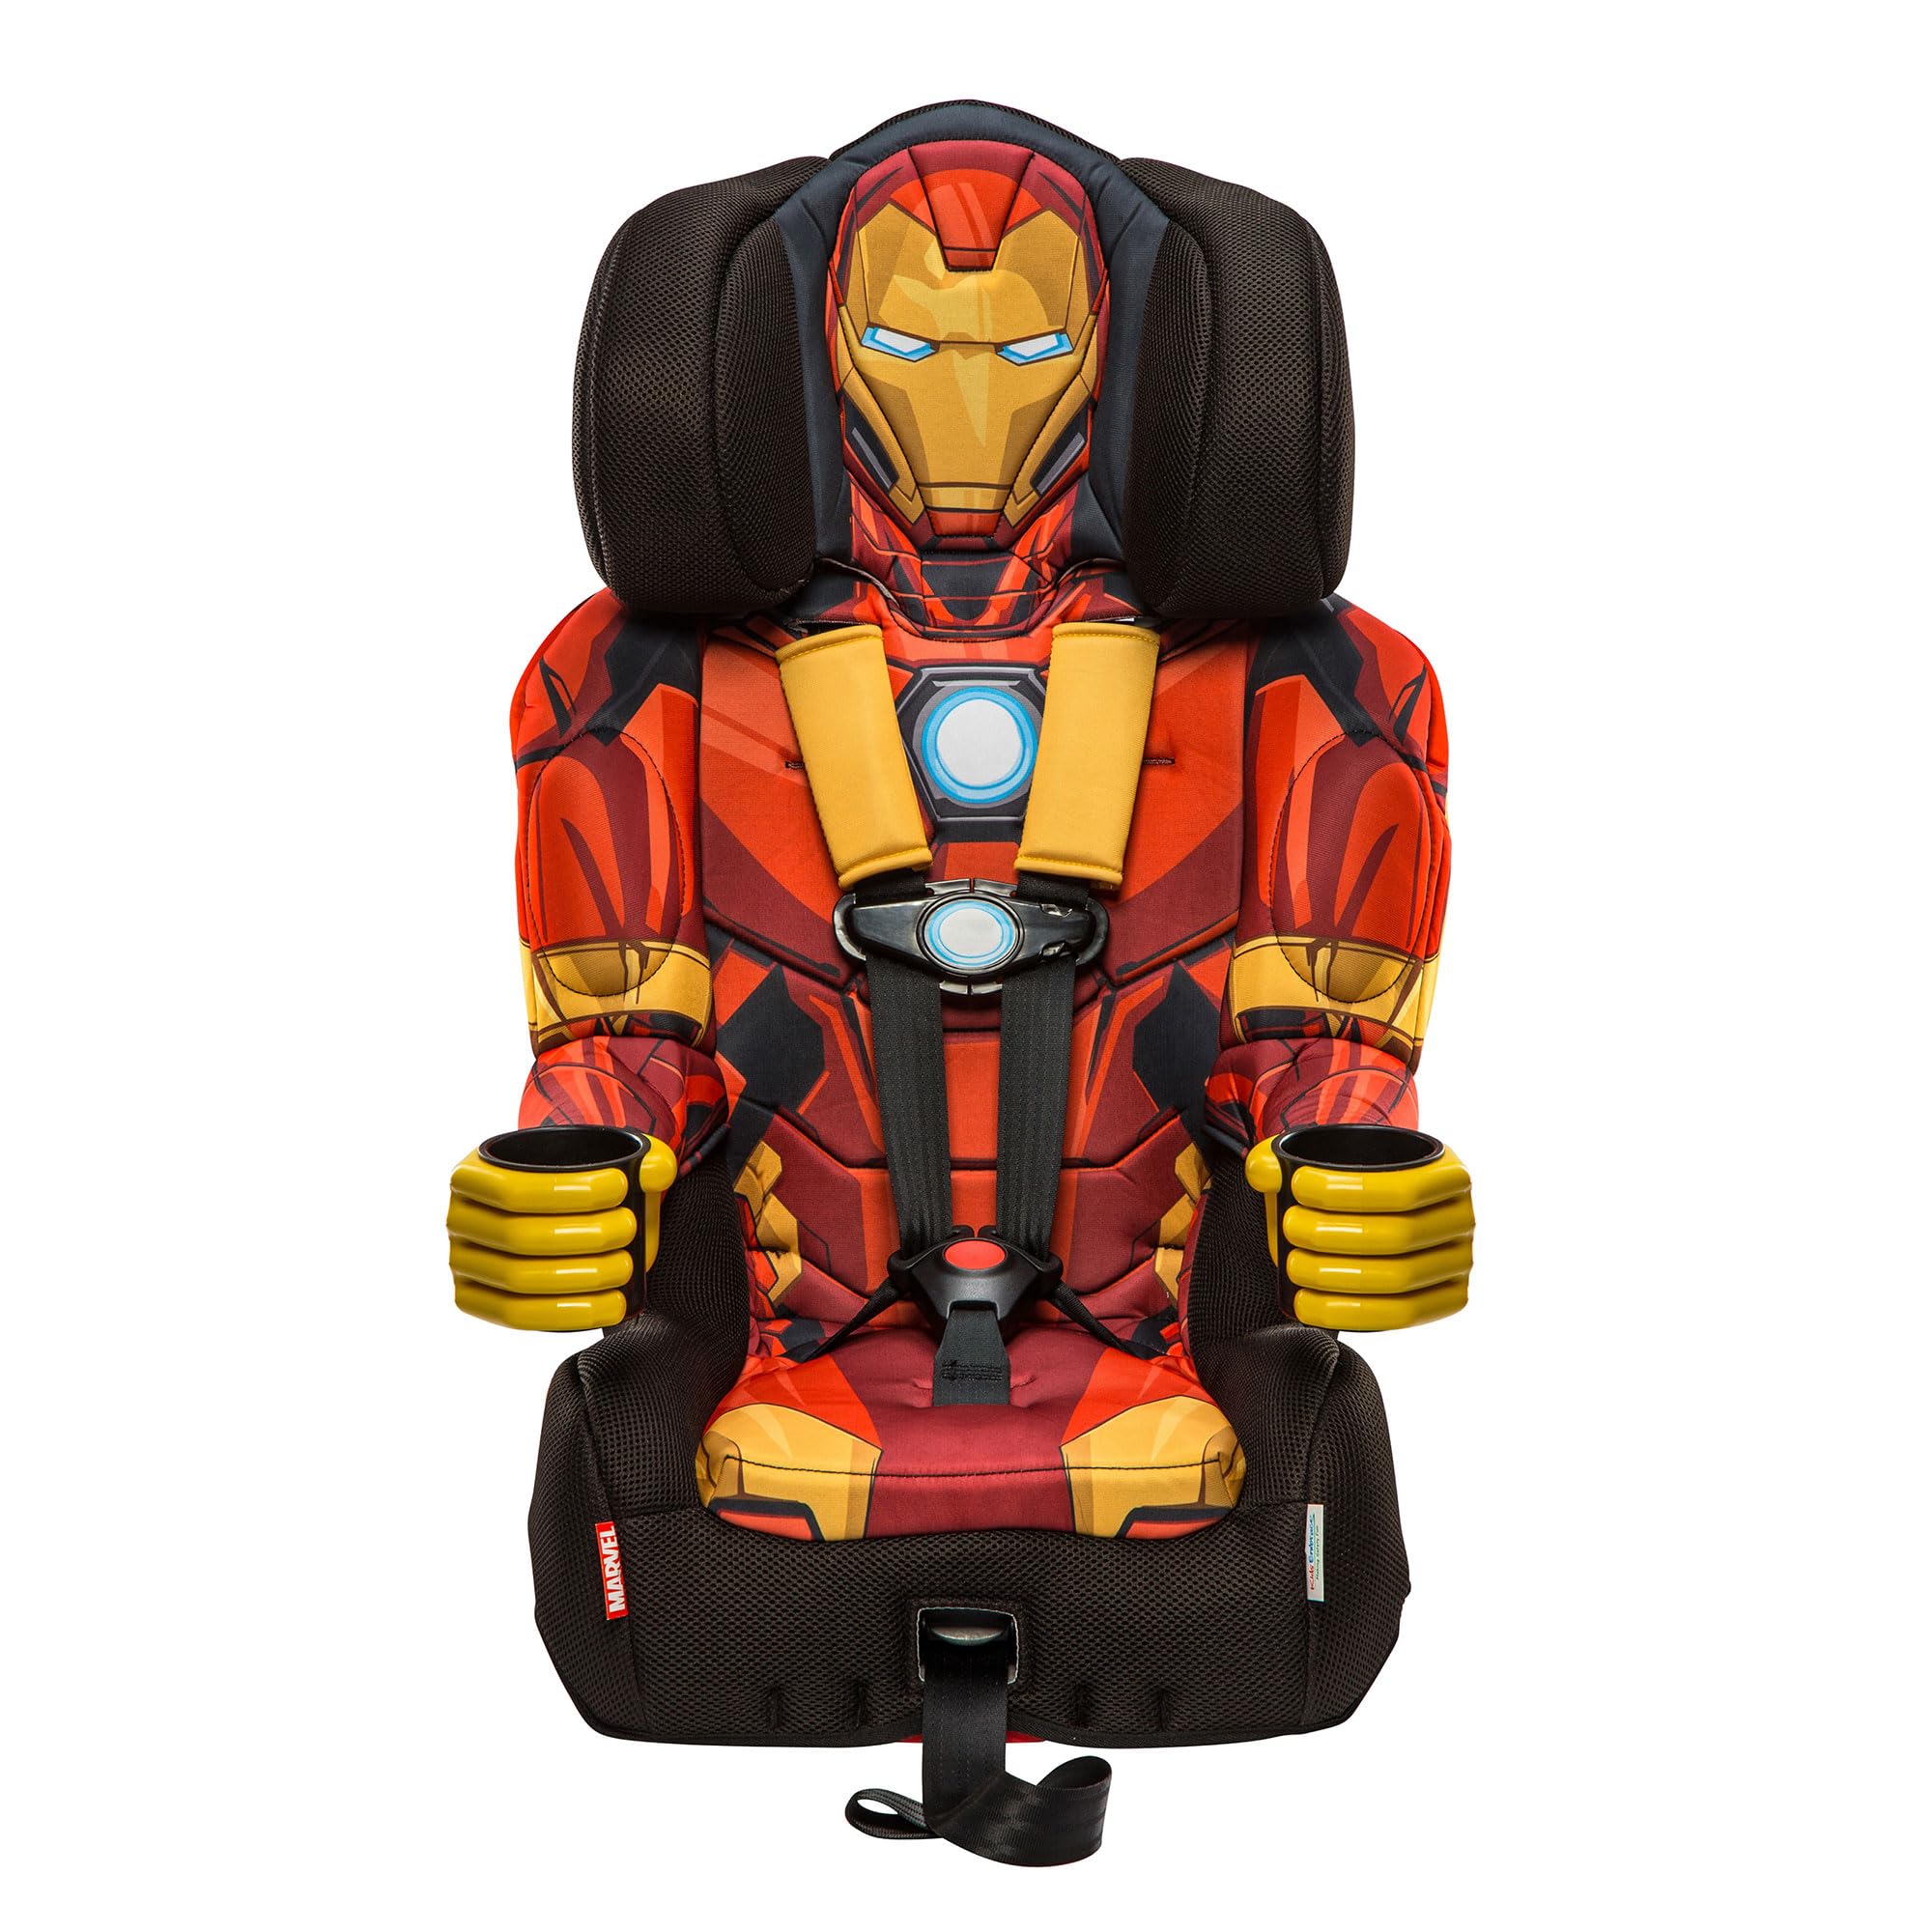 KidsEmbrace 2-in-1 Forward-Facing Harness Booster Seat, Marvel Iron Man